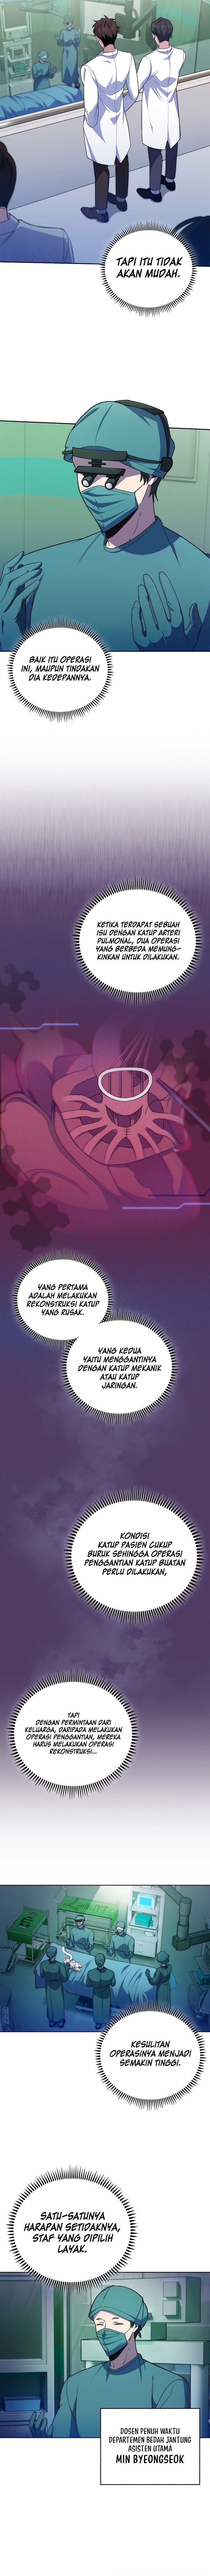 level-up-doctor Chapter 74